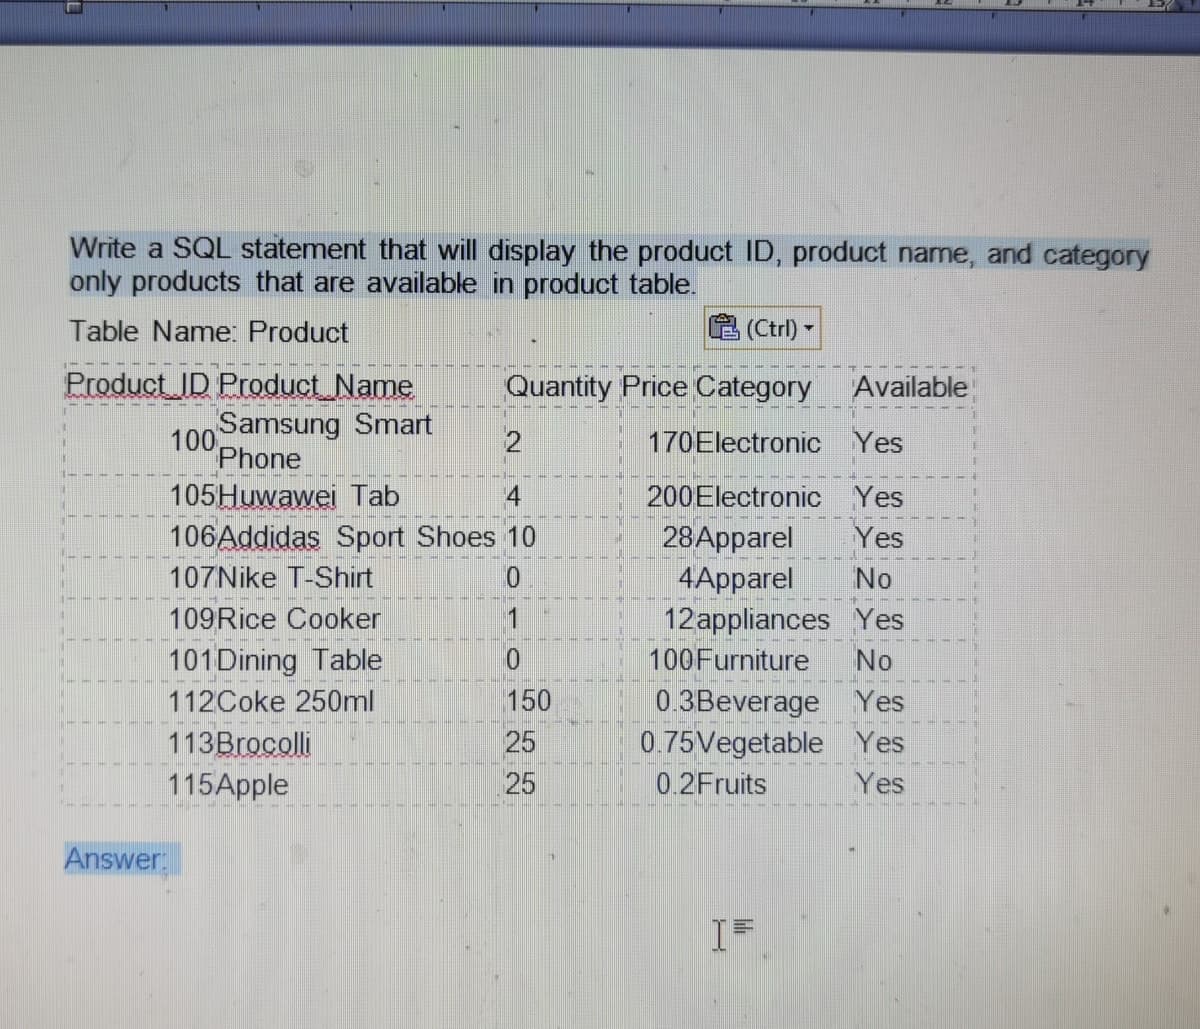 Write a SQL statement that will display the product ID, product name, and category
only products that are available in product table.
Table Name: Product
色(Ctrl),
Product_ID Product_Name
Quantity Price Category
Available
Samsung Smart
100
Phone
170Electronic Yes
105Huwawei Tab
4
200Electronic Yes
106Addidas Sport Shoes 10
28Apparel
Yes
107Nike T-Shirt
4Apparel
12appliances Yes
No
109Rice Cooker
1
101 Dining Table
100Furniture
No
0.3Beverage Yes
0.75Vegetable Yes
112Coke 250ml
150
113Brocolli
115Apple
25
25
0.2Fruits
Yes
Answer:
